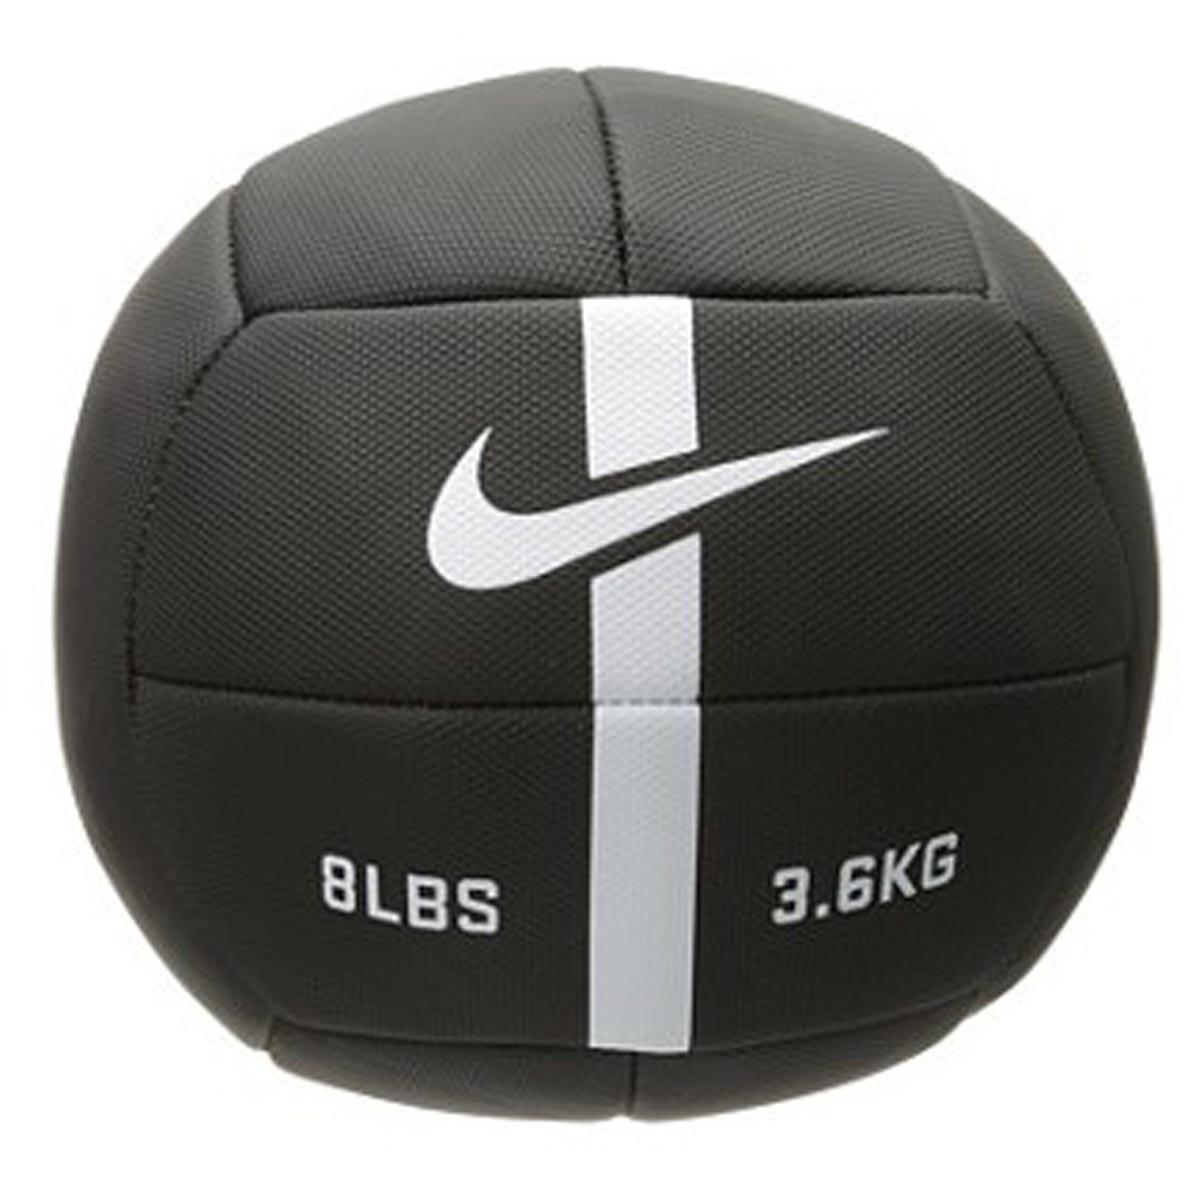 Buy Nike Strength Training Ball 8lb Online India|Nike Fitness Products